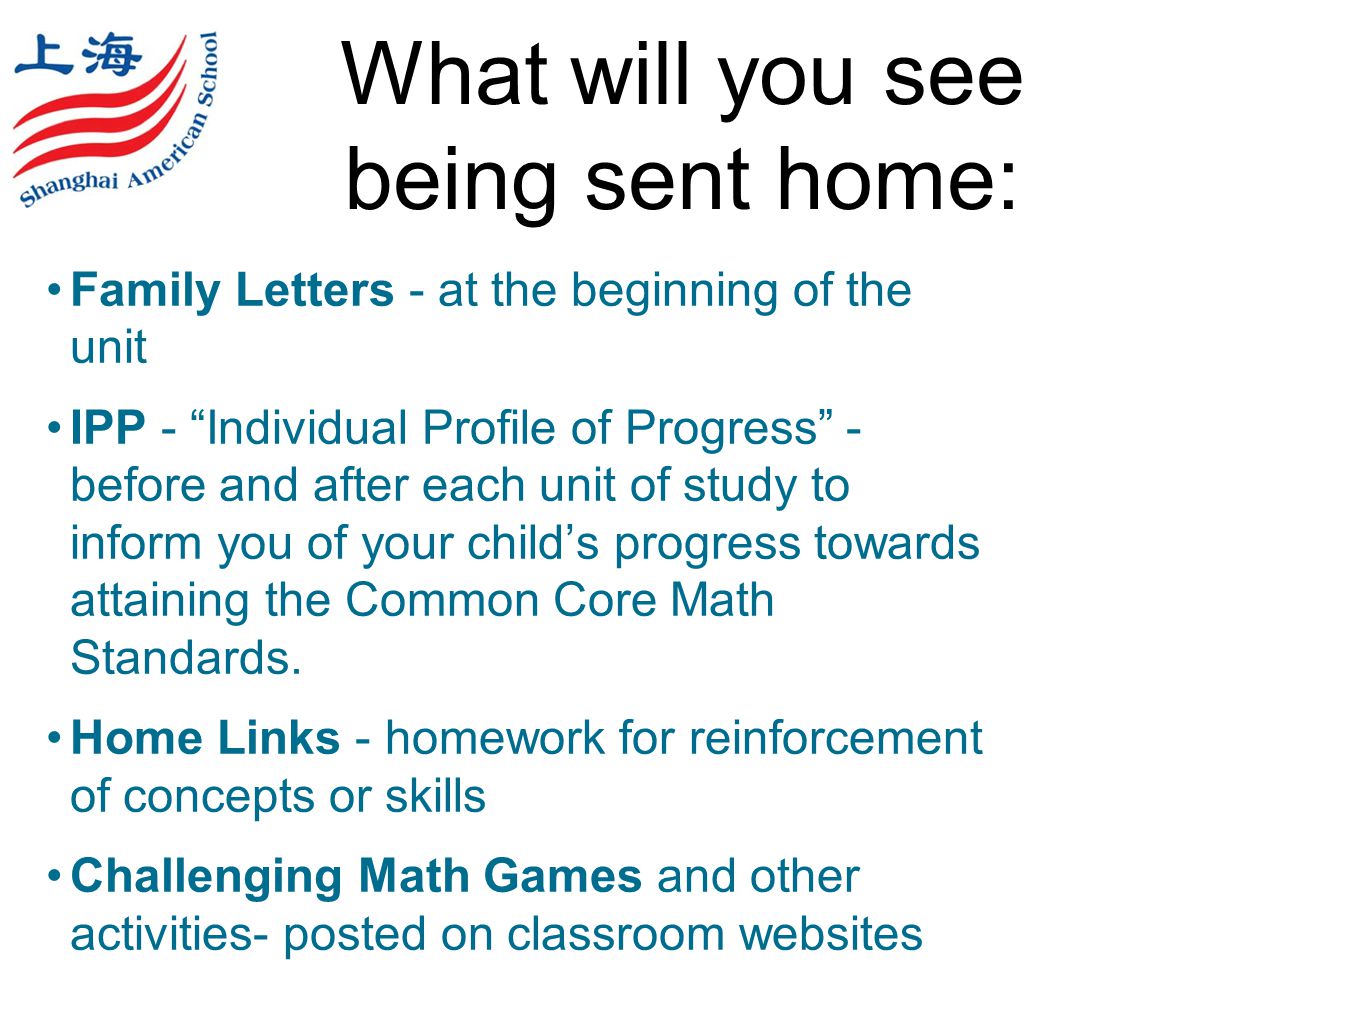 What will you see being sent home: Family Letters - at the beginning of the unit IPP - Individual Profile of Progress - before and after each unit of study to inform you of your child’s progress towards attaining the Common Core Math Standards.